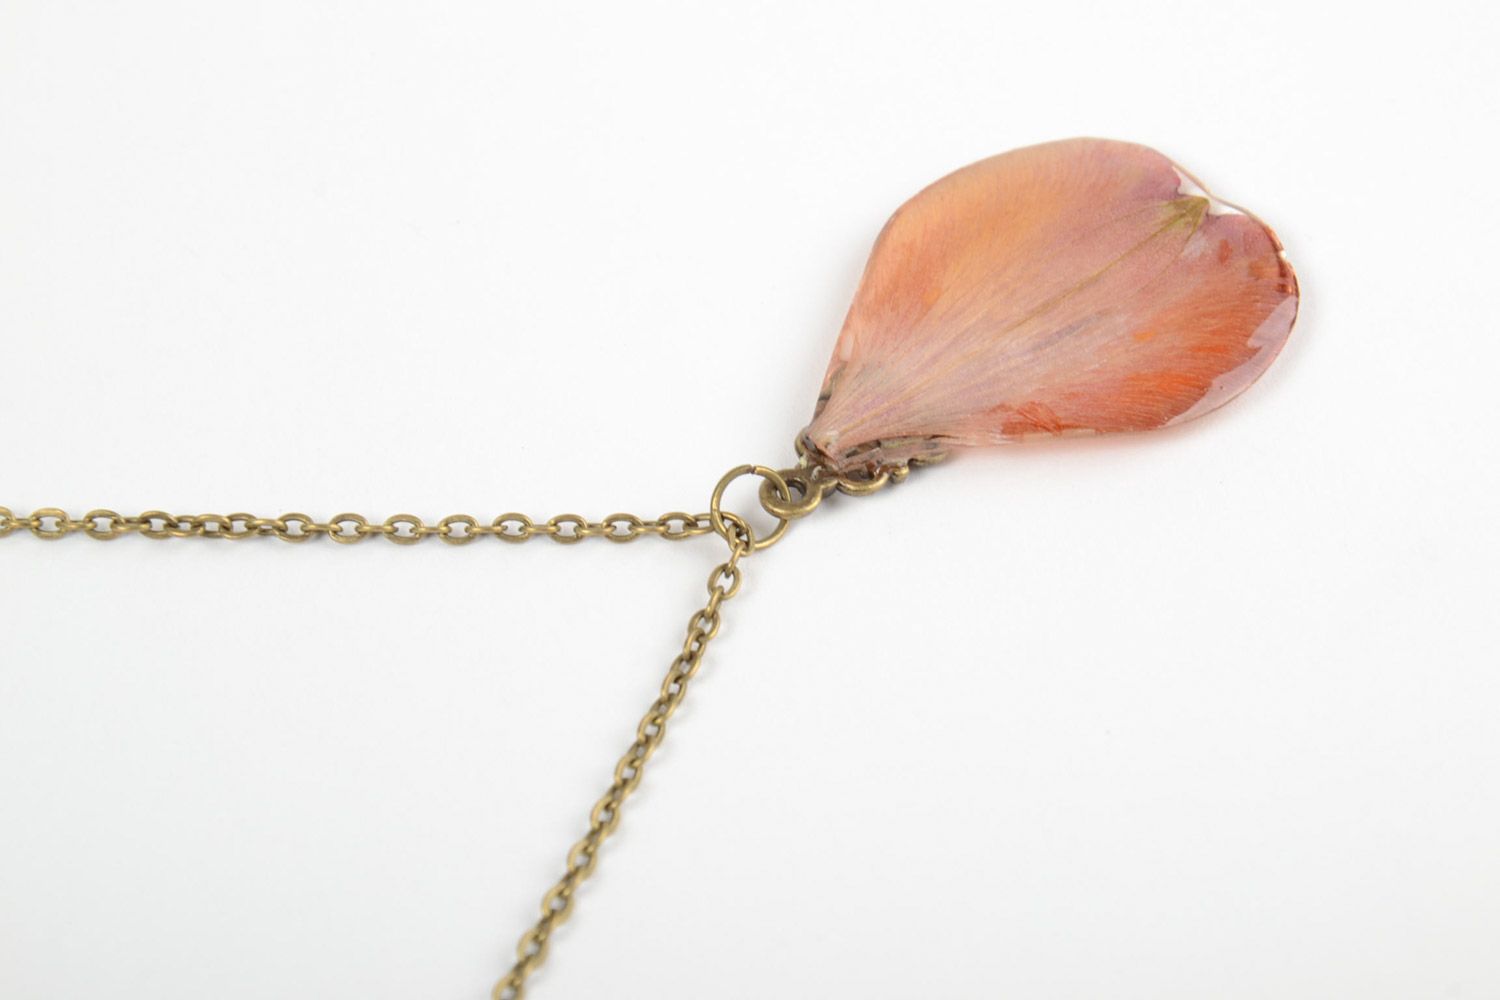 Homemade neck pendant on long chain with flower petal coated with epoxy photo 4